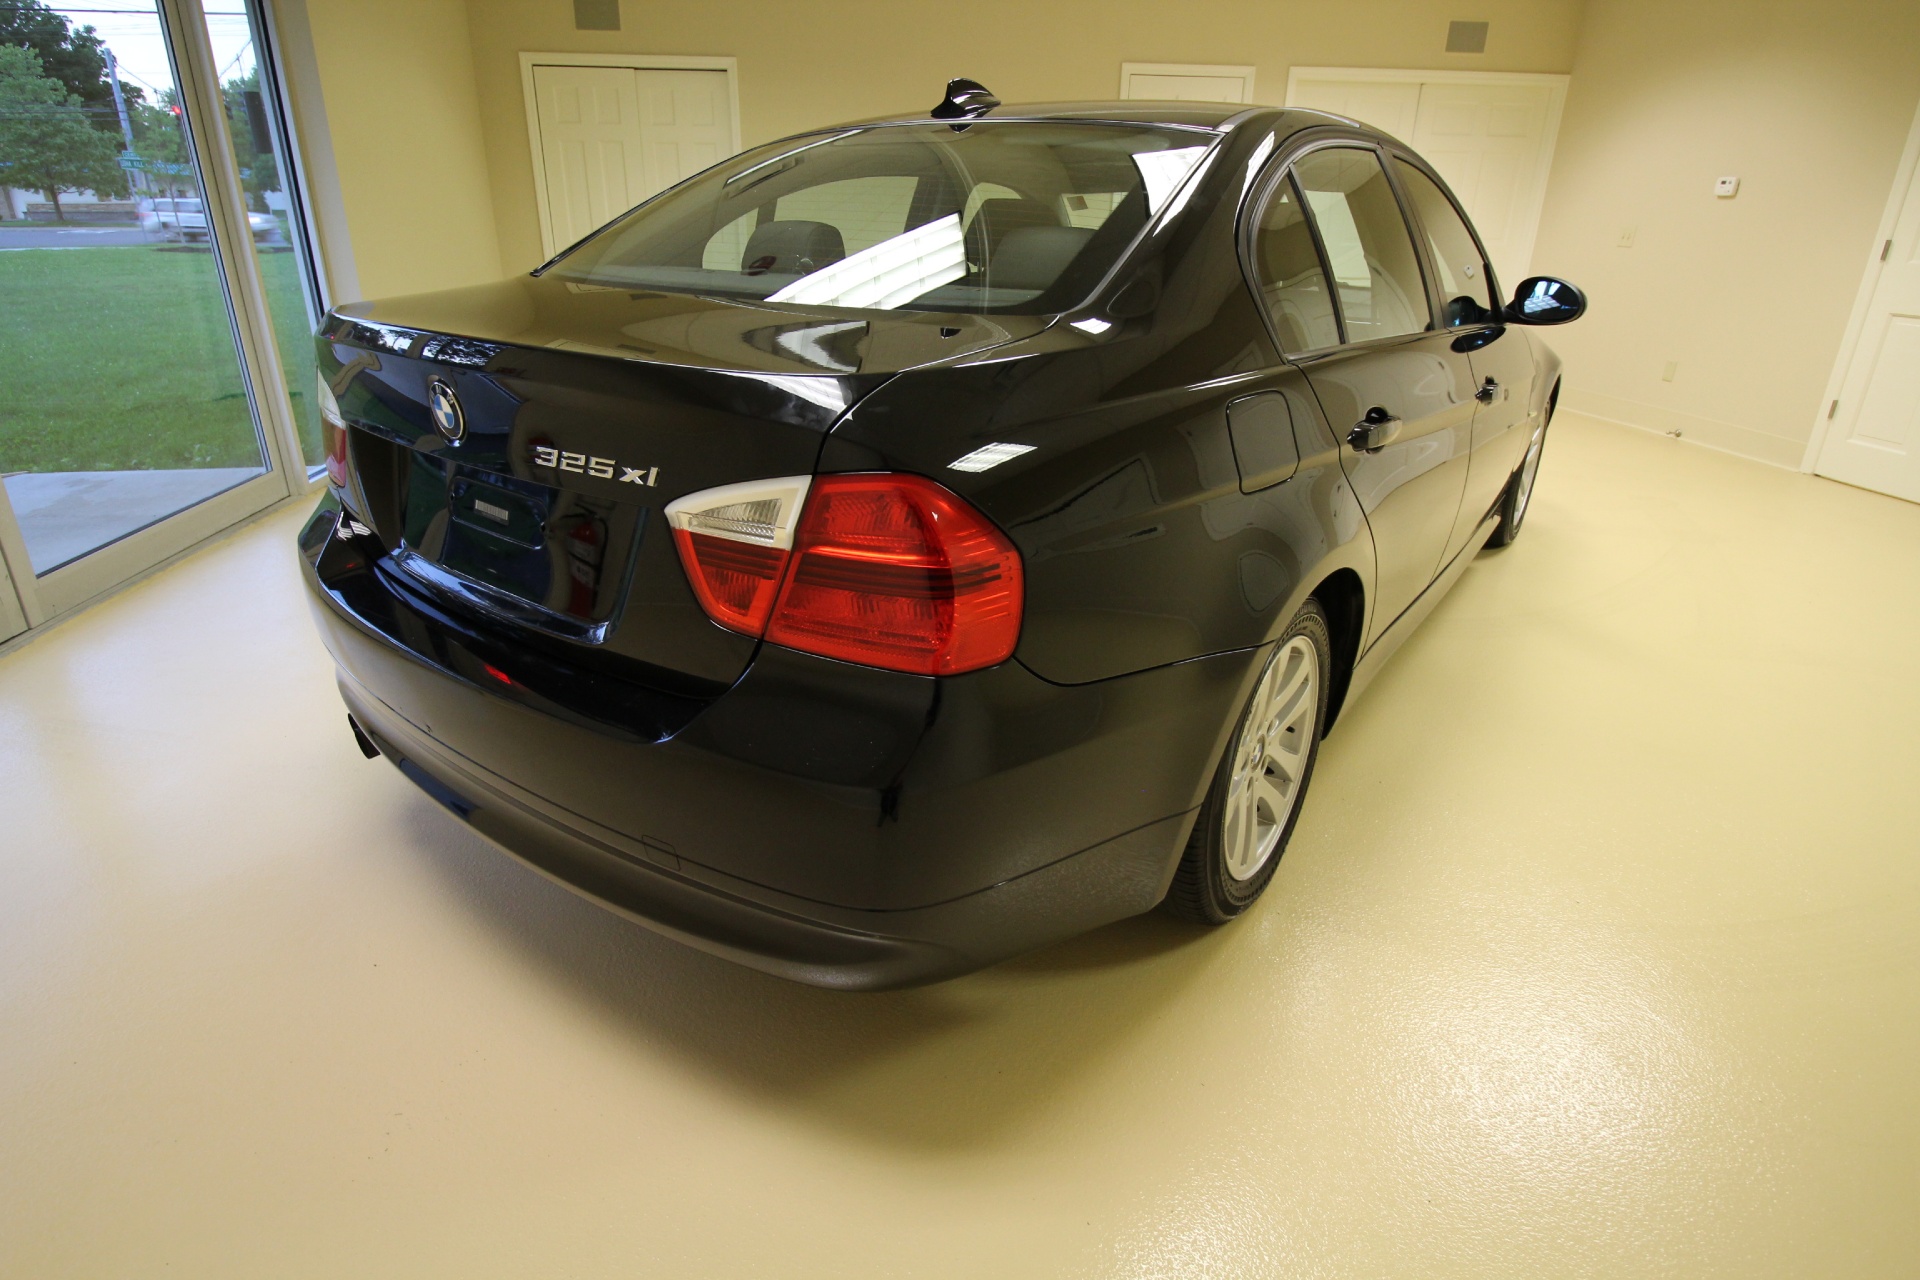 Used 2006 Black BMW 3 Series 325xi RARE 6 SPEED MANUAL,FULLY SERVICED NEW CLUTCH AND FLYWHEEL | Albany, NY